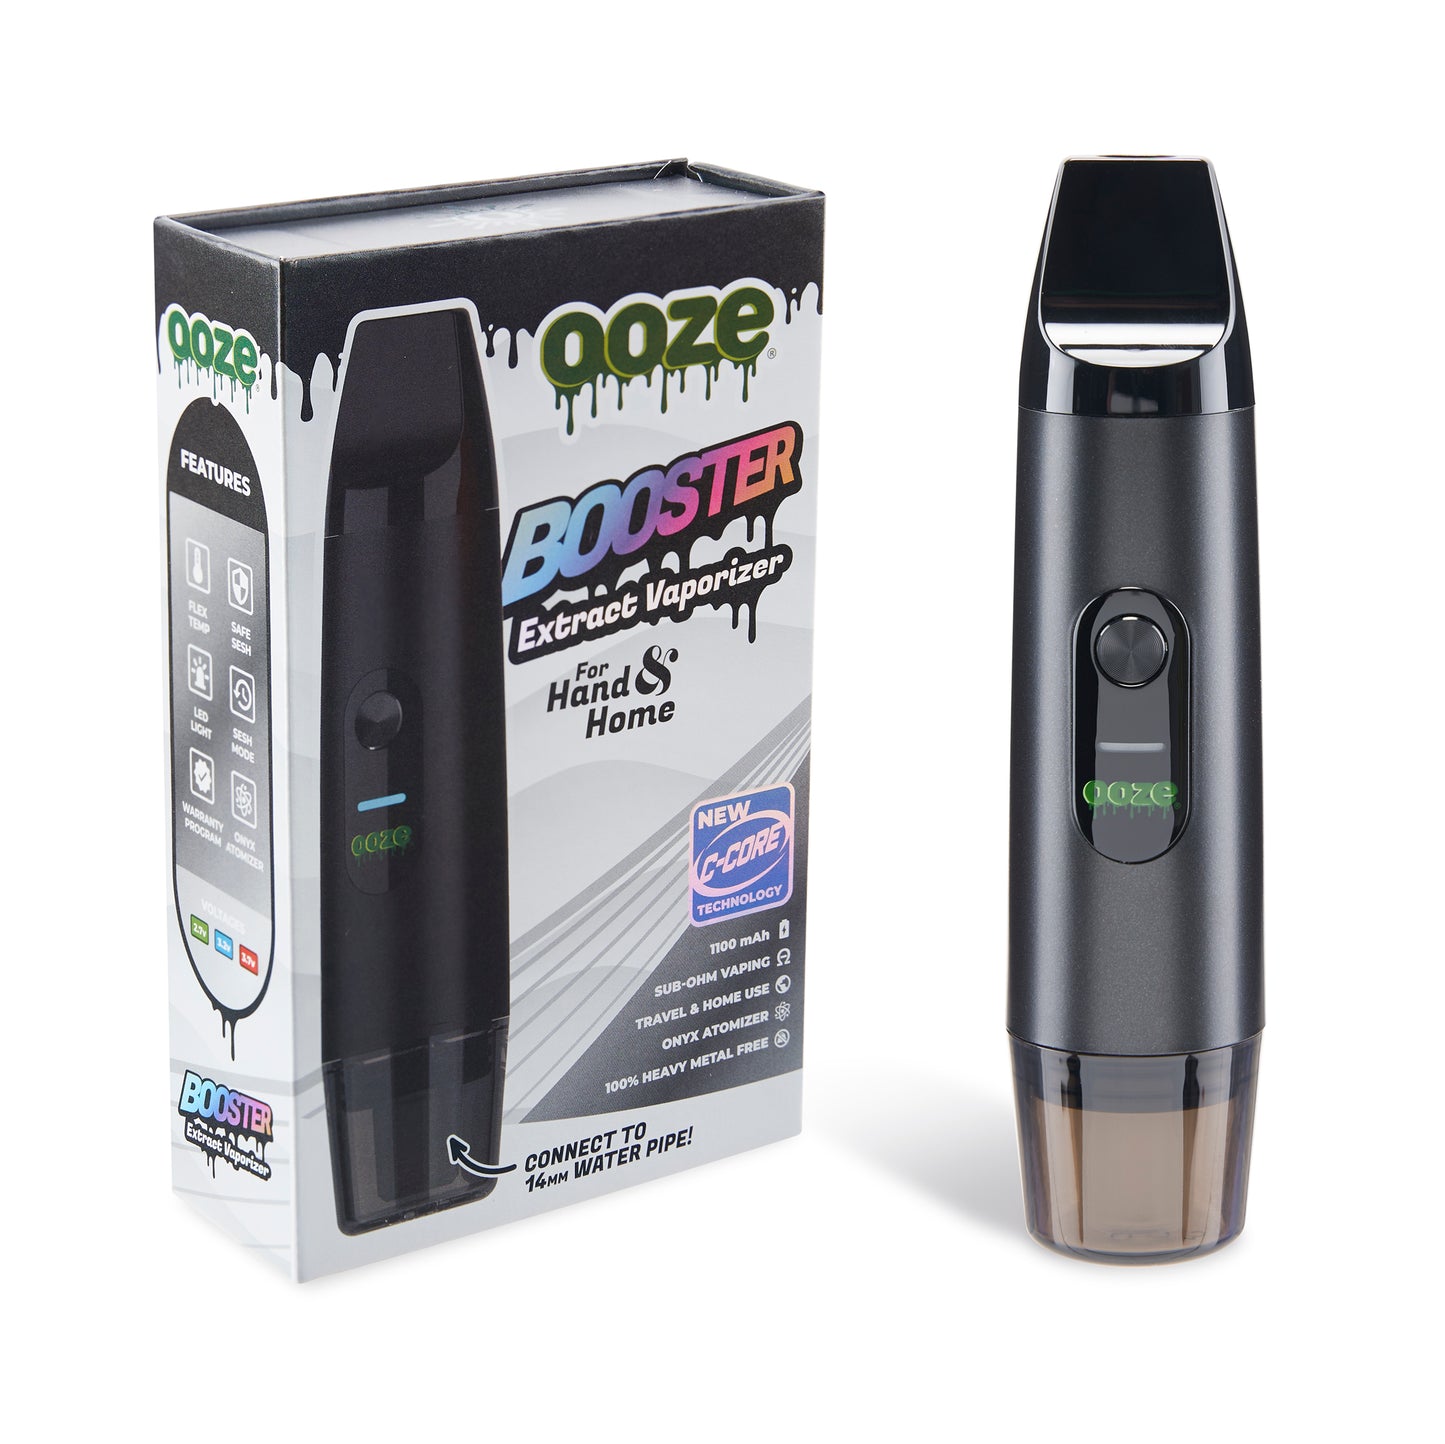 The Panther Black Ooze Booster Extract Vaporizer is shown standing upright with the cap attached, next to the box.